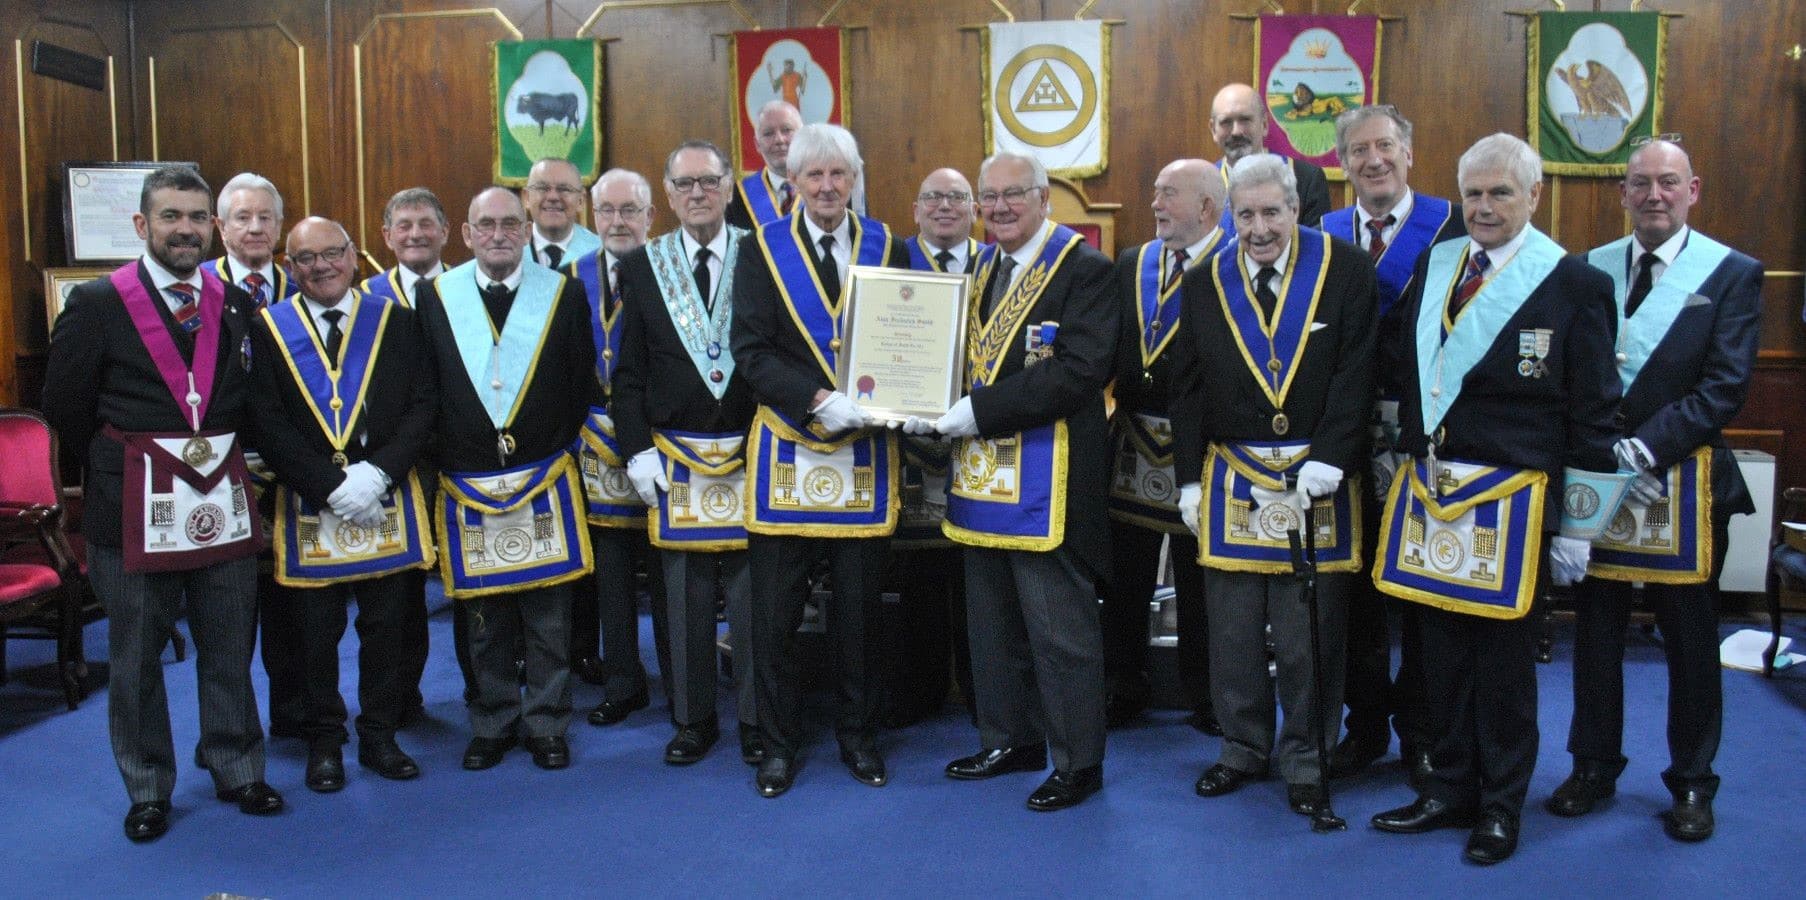 50 Years’ Service to his Lodge